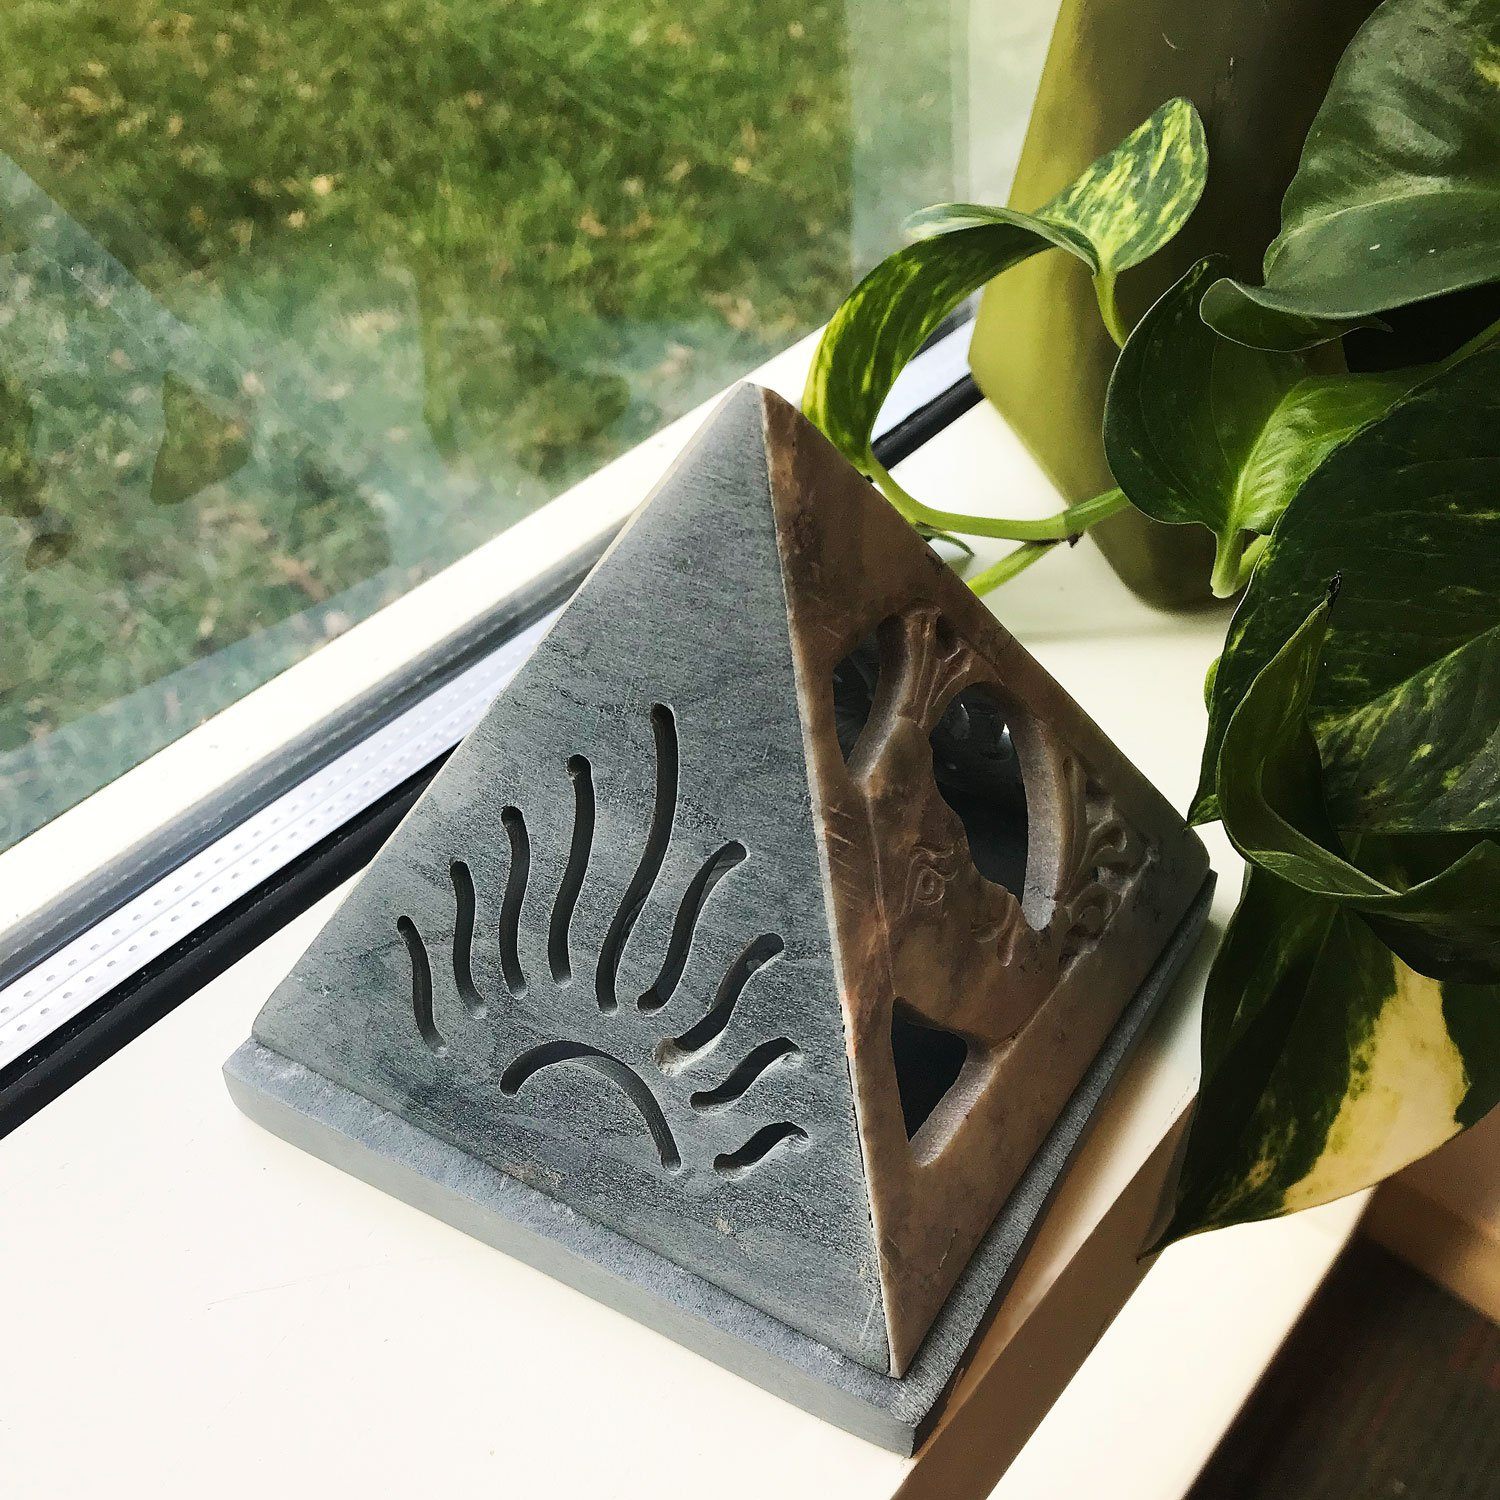 Pyramid Incense Burner with Incense Cones from Ritual+Vibe